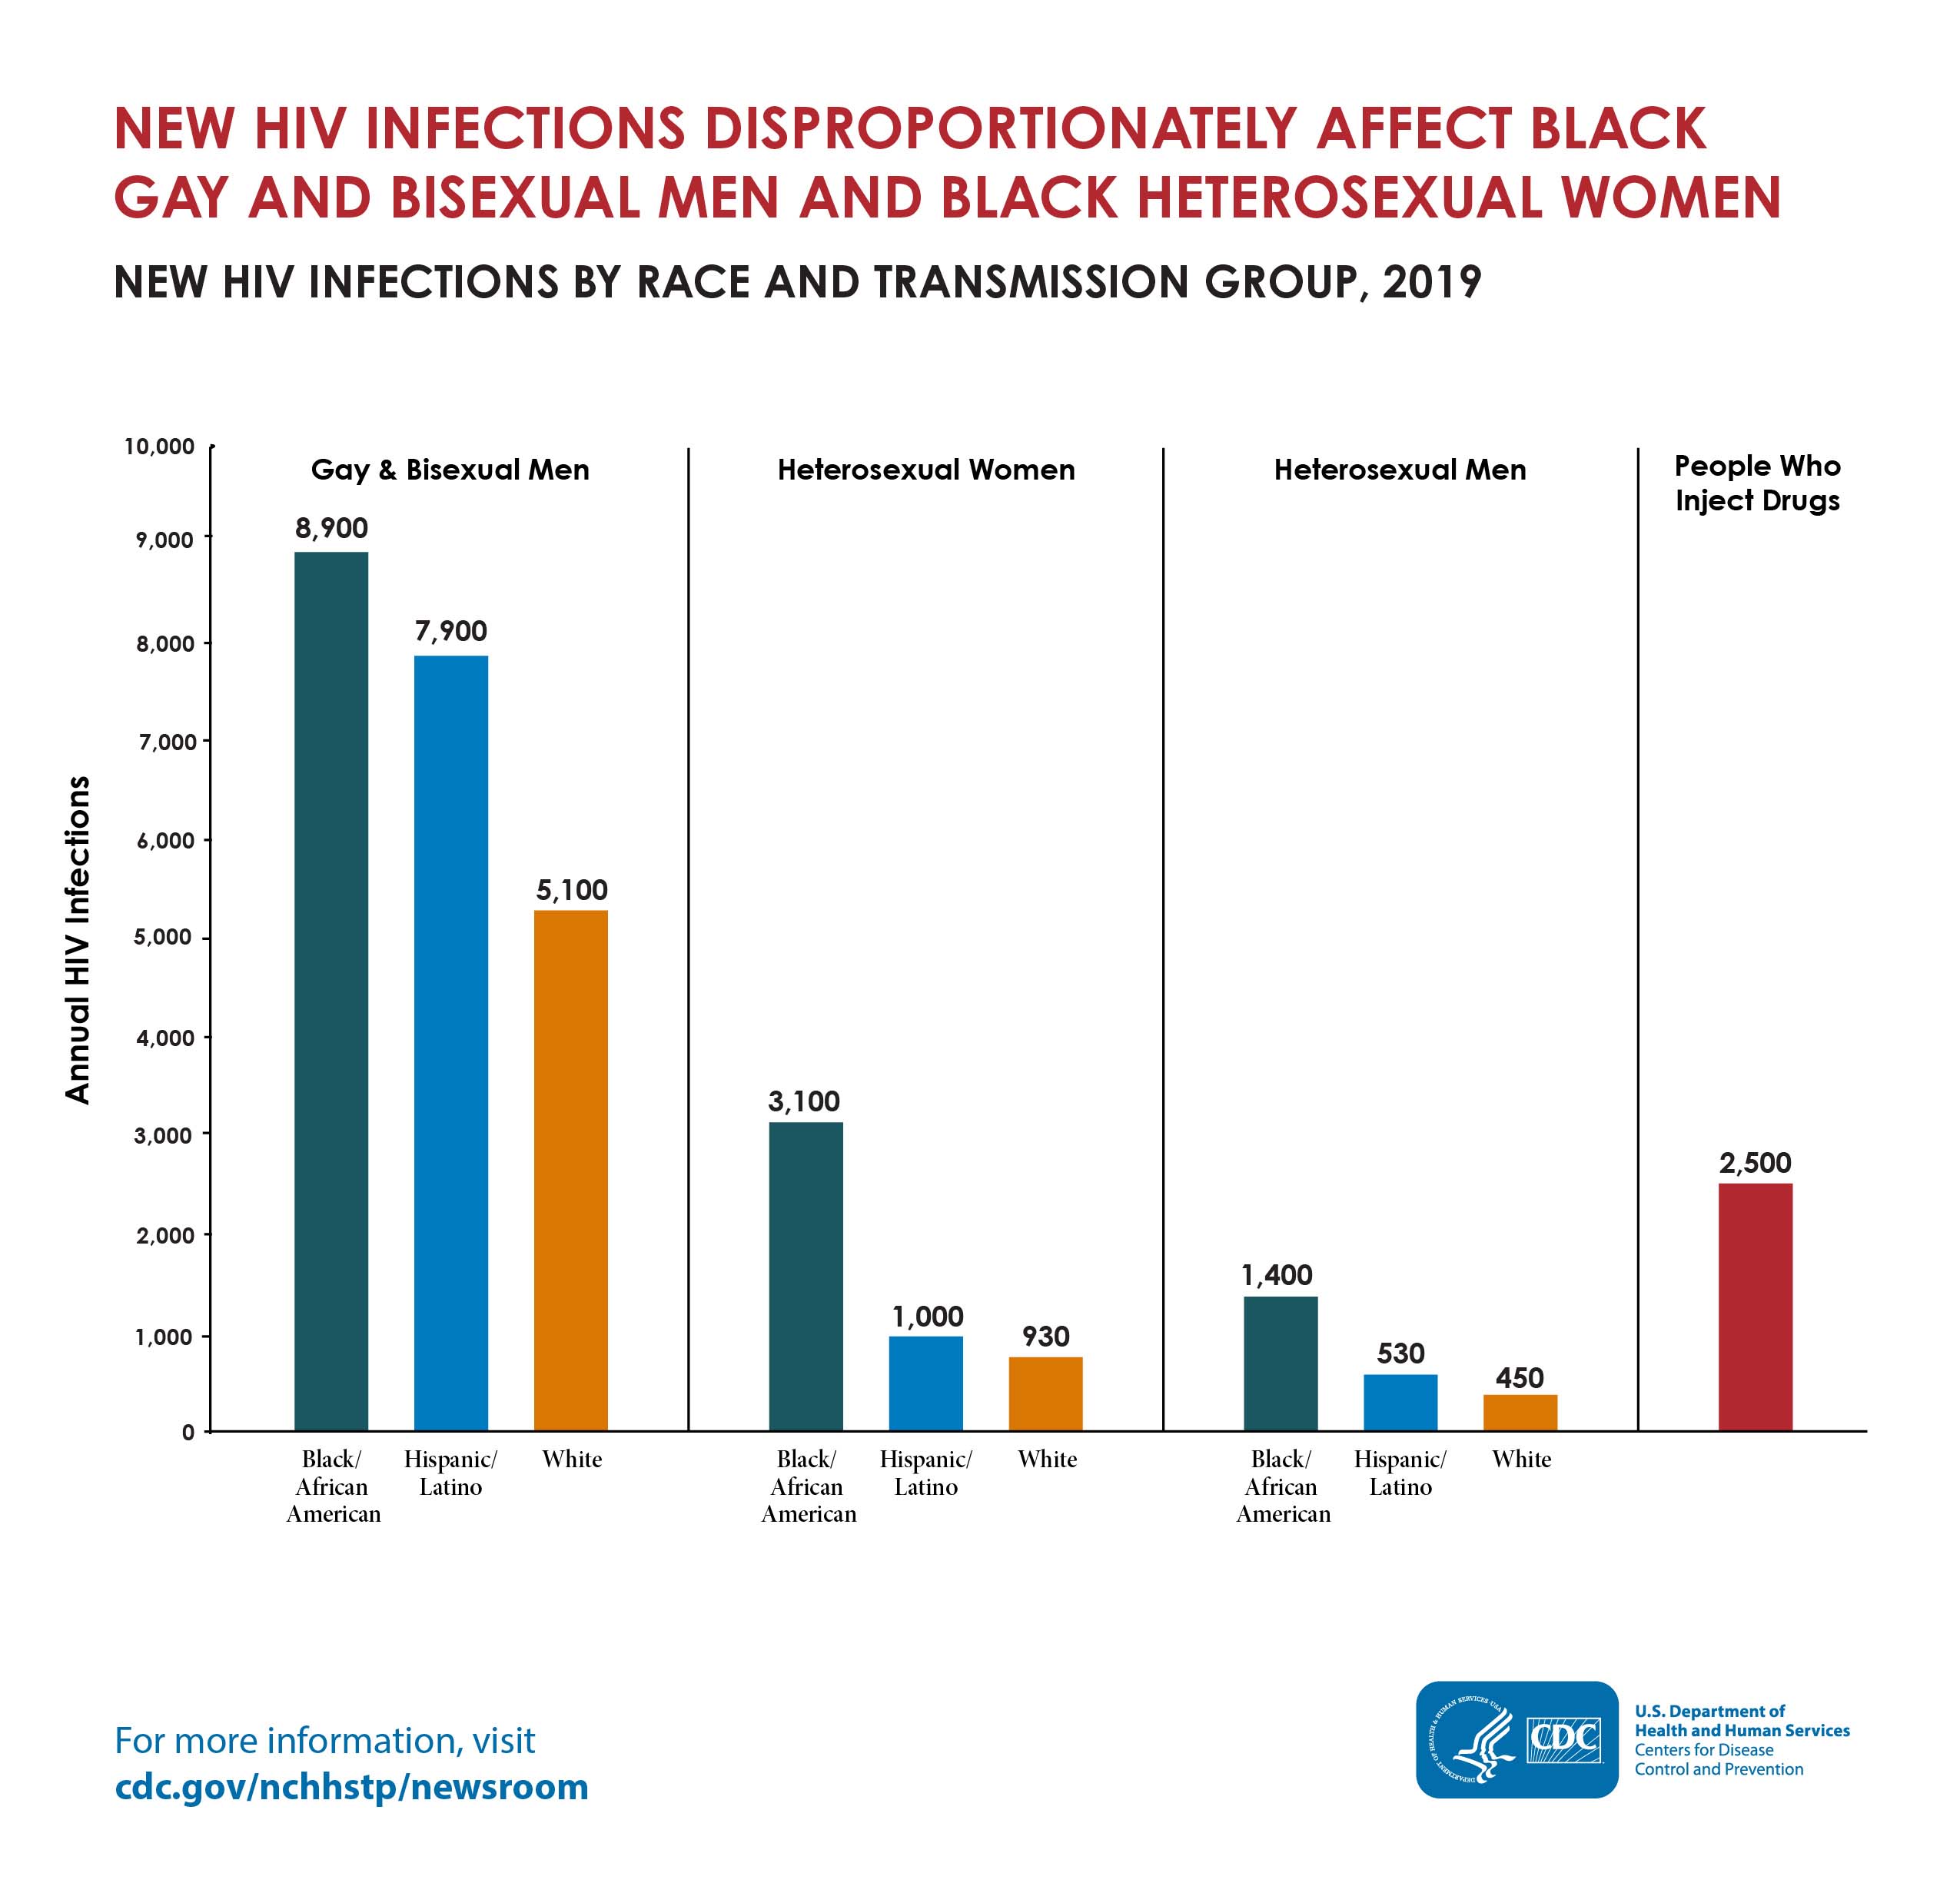 New HIV Infections Disproportionately Affect Black Gay and Bisexual Men and Black Heterosexual Women